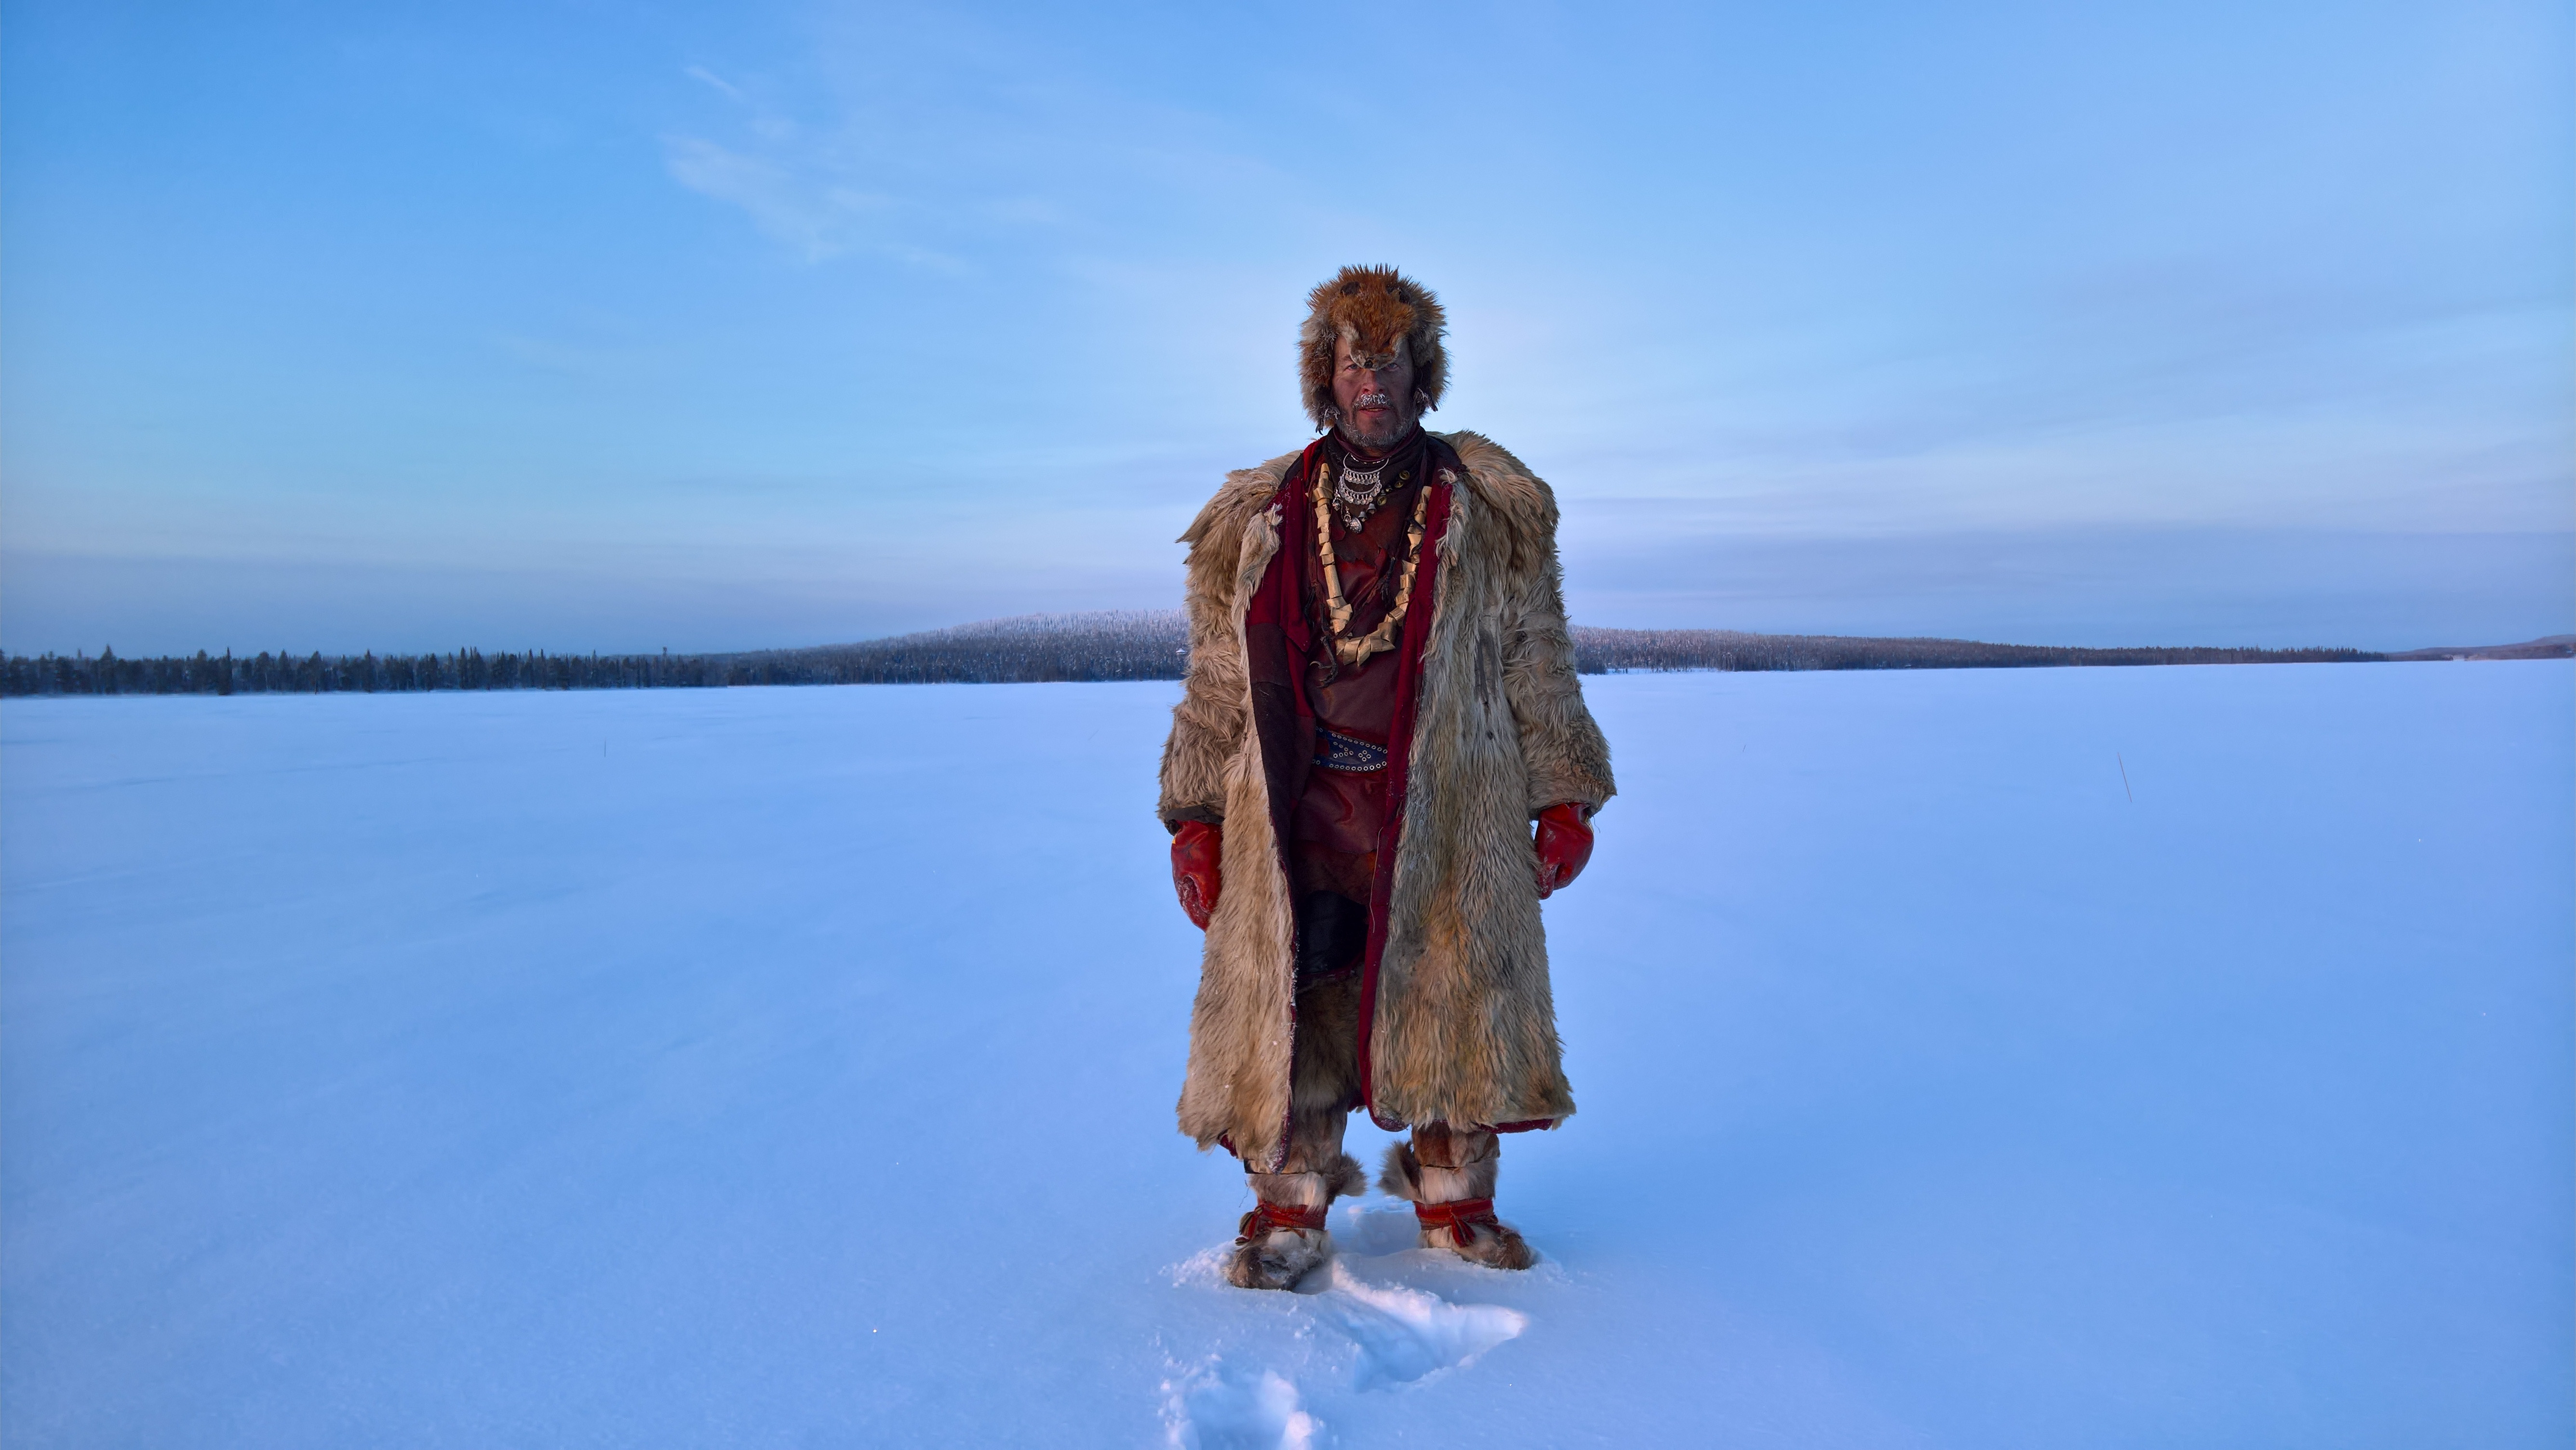 A Lapland Shaman braves minus 35° C cold on the frozen lake near his home in Finland’s far north. A life-long resident, even he admits the morning was chilly. Shot with Lumia 950, by Stephen Alvarez.